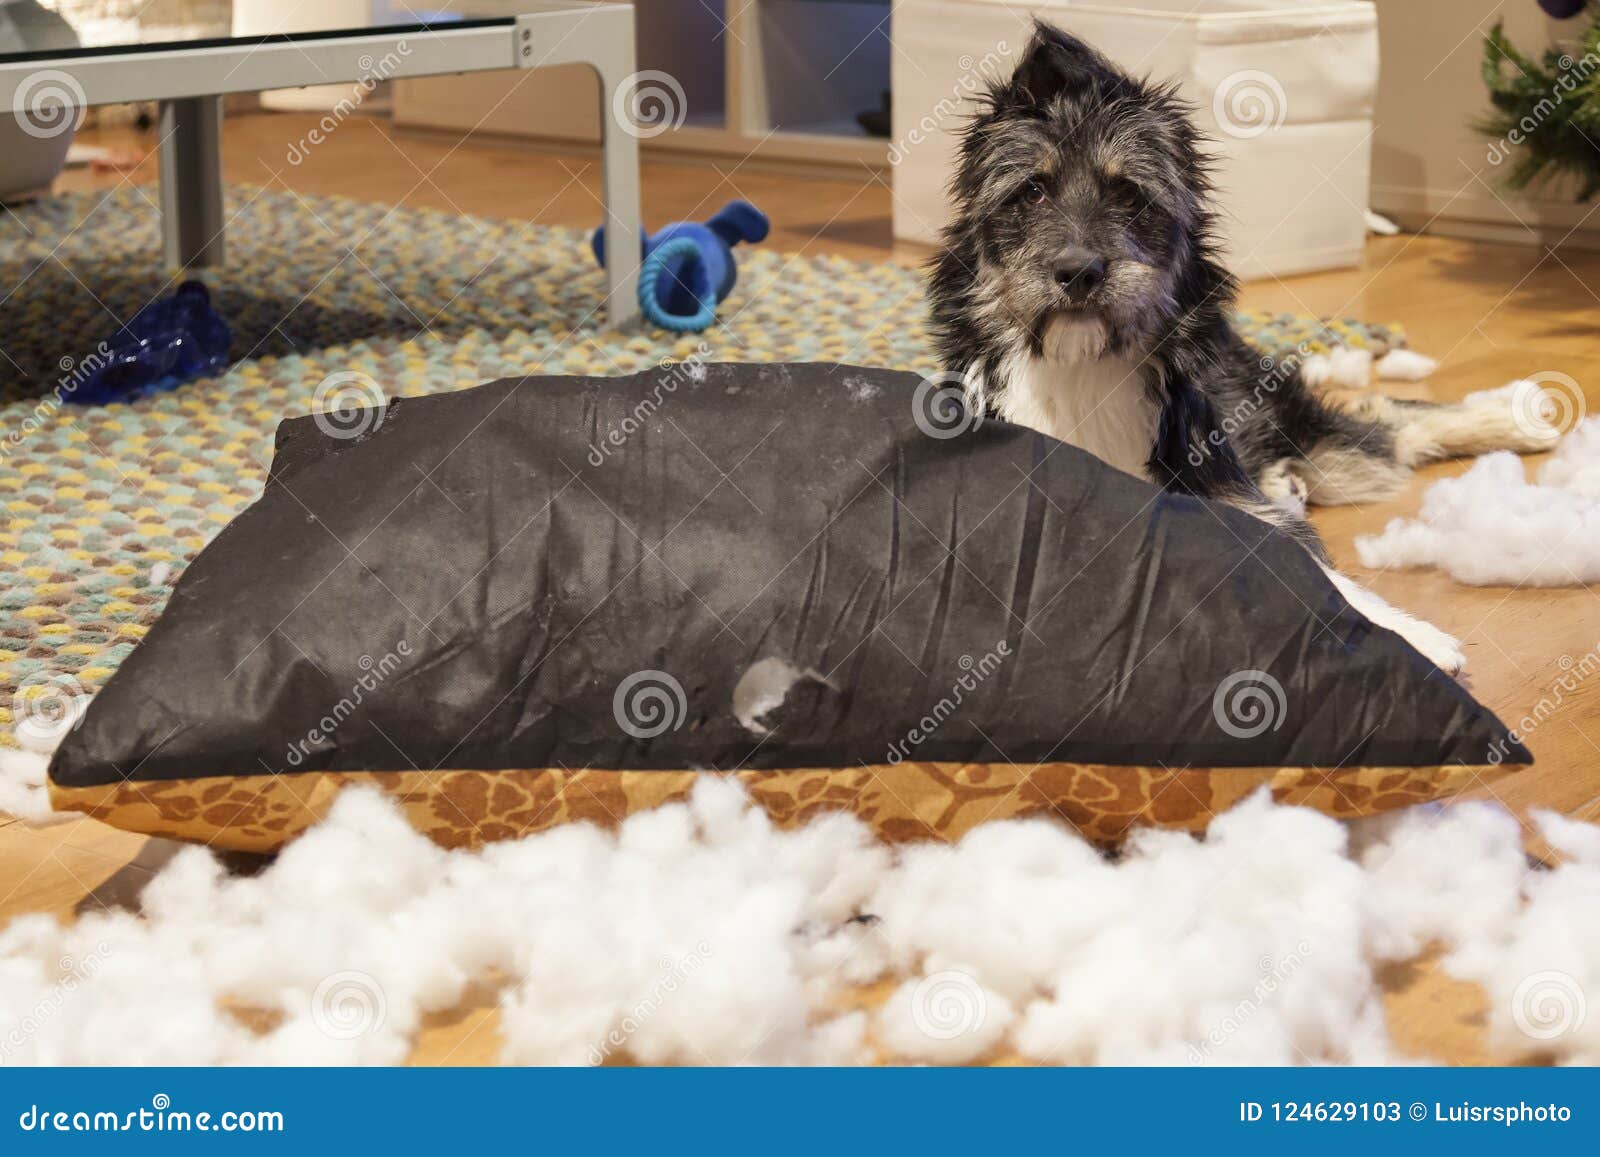 cutie dog with ripped up cushion